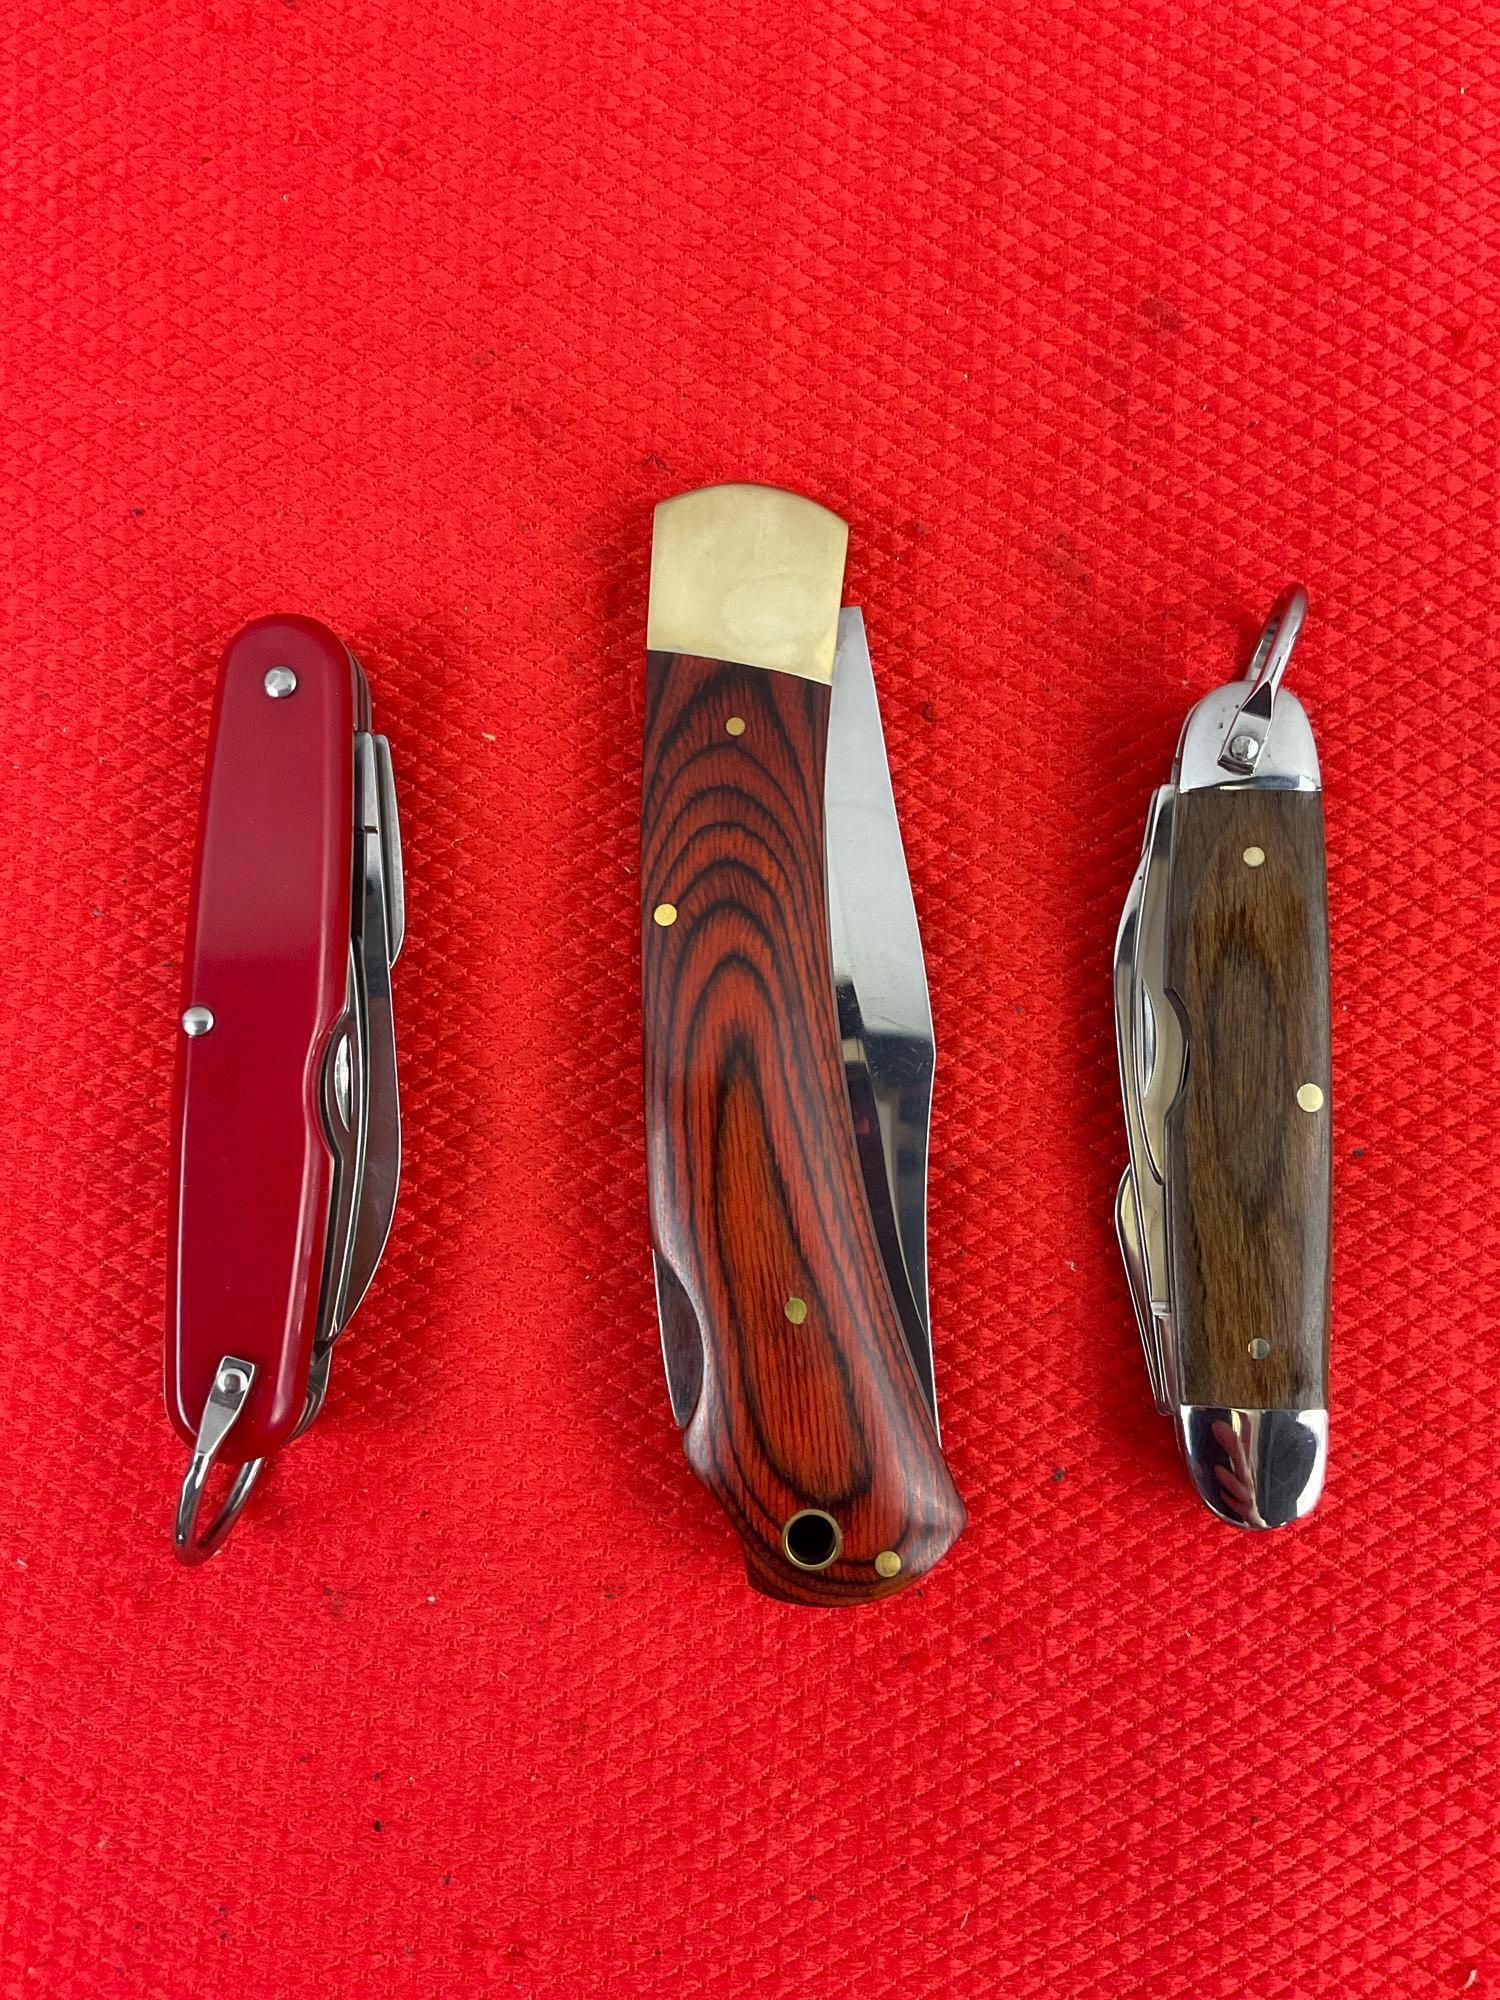 3 pcs Scout Ware Steel Folding Blade Pocket Knives. 2x Boy Scouts. Girl Scouts 100 Years. NIB. See